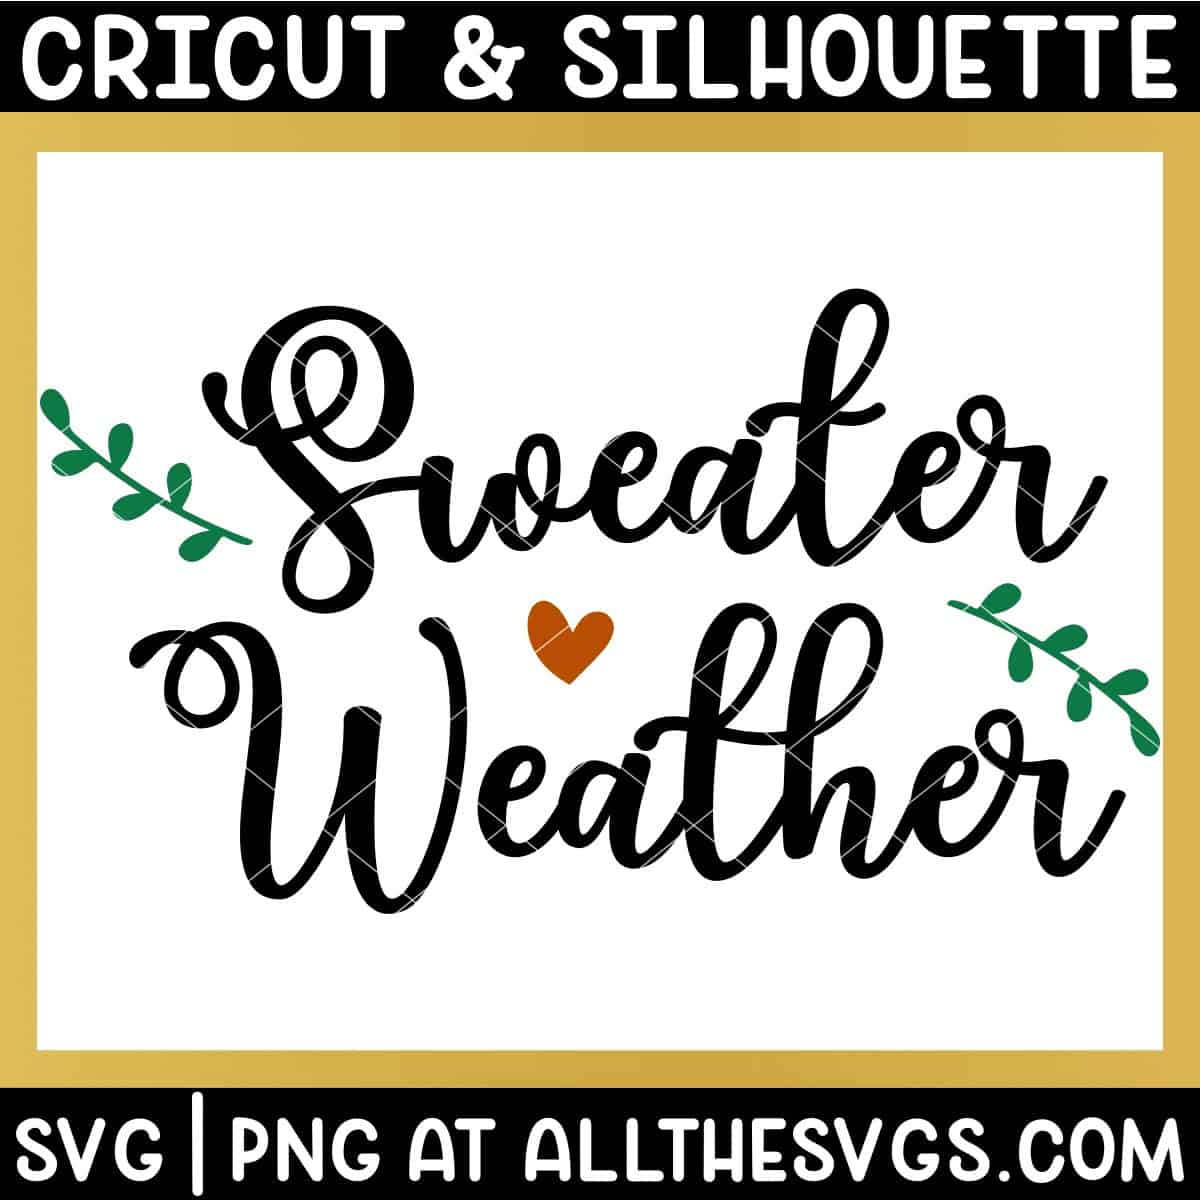 sweater weather svg file with heart, vine leaf.